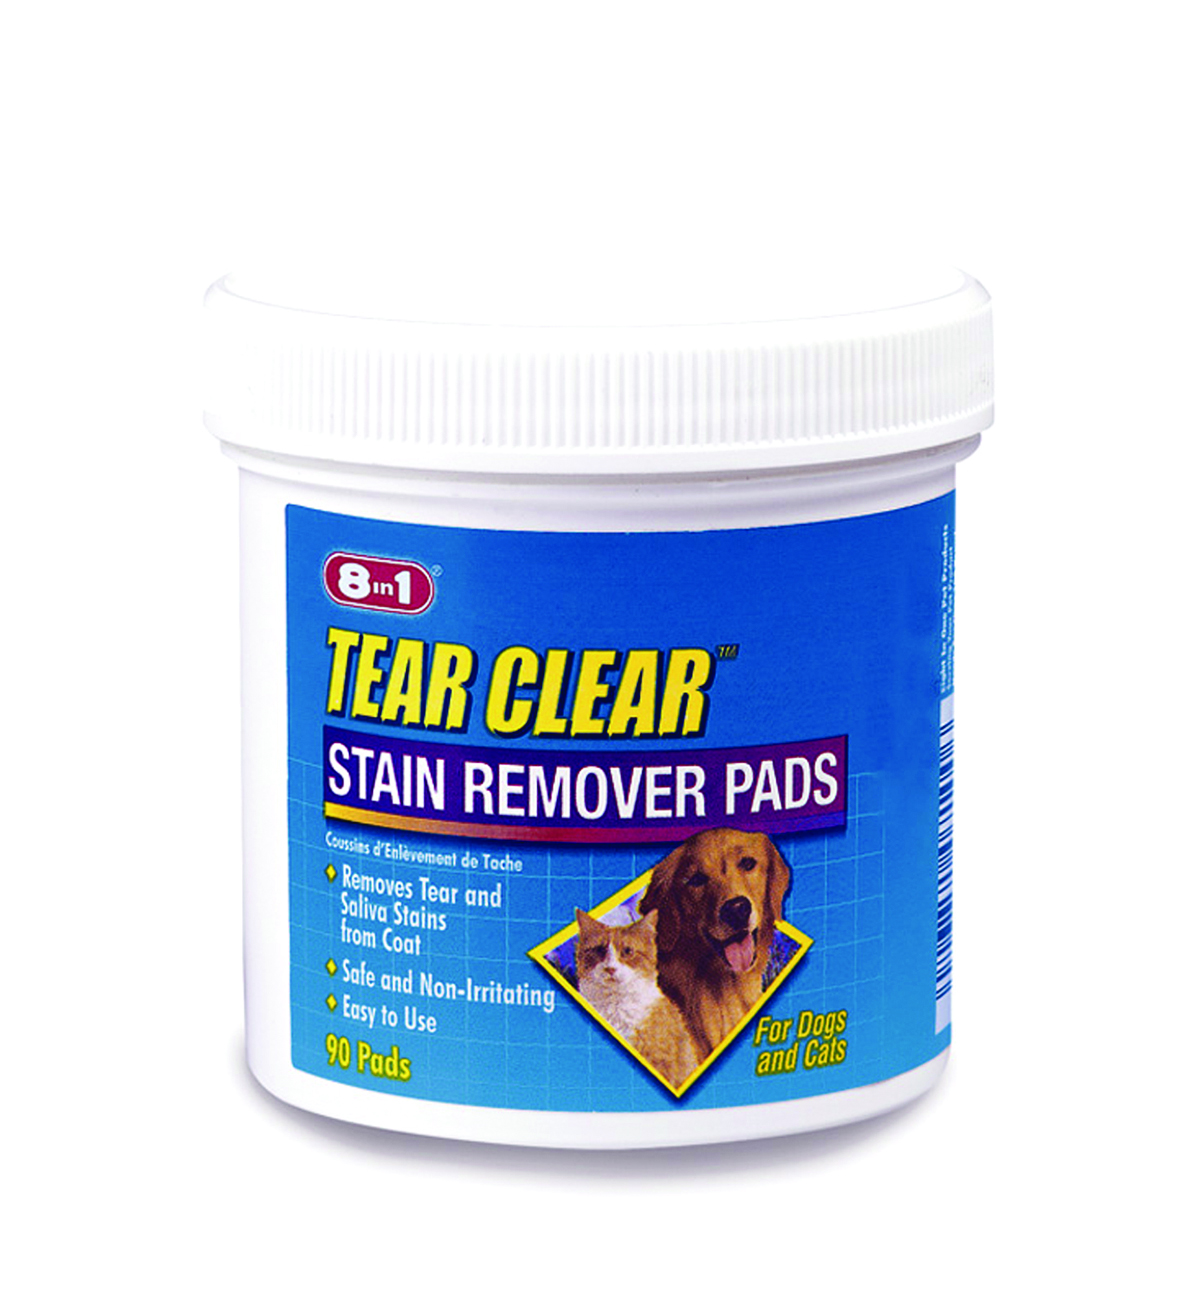 TEAR CLEAR STAIN REMOVER PADS FOR CATS & DOGS